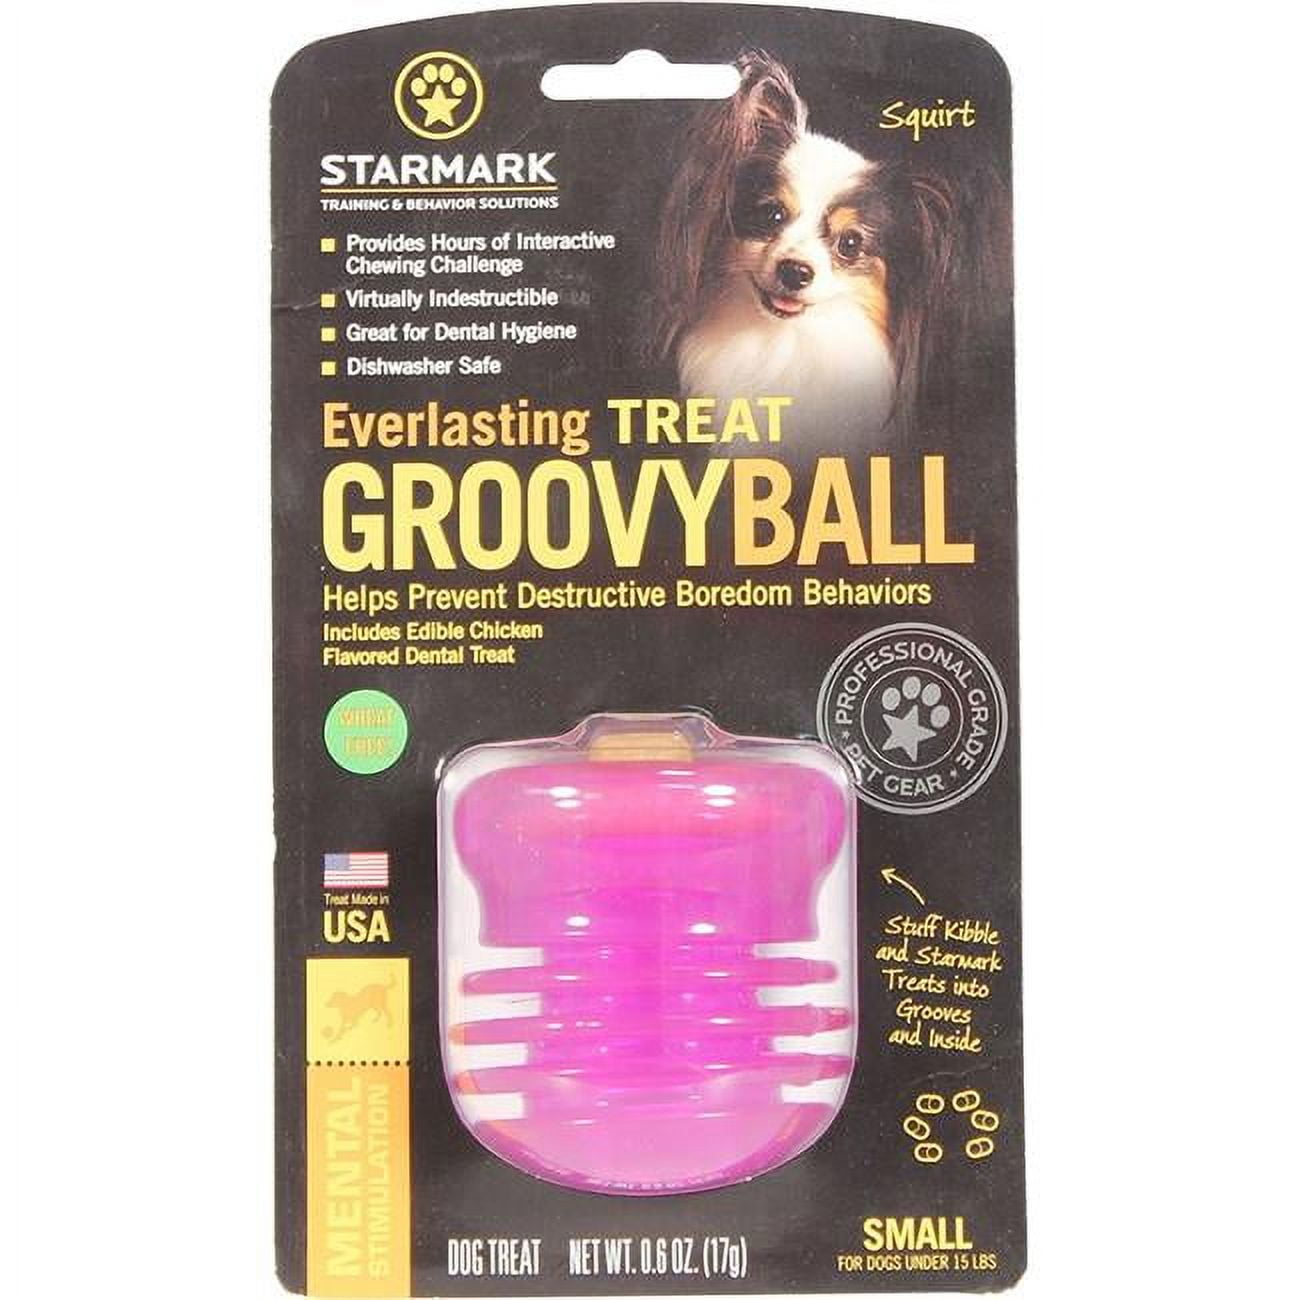 114131 Everlasting Treat Groovy Ball Dog Toy - Green, Small